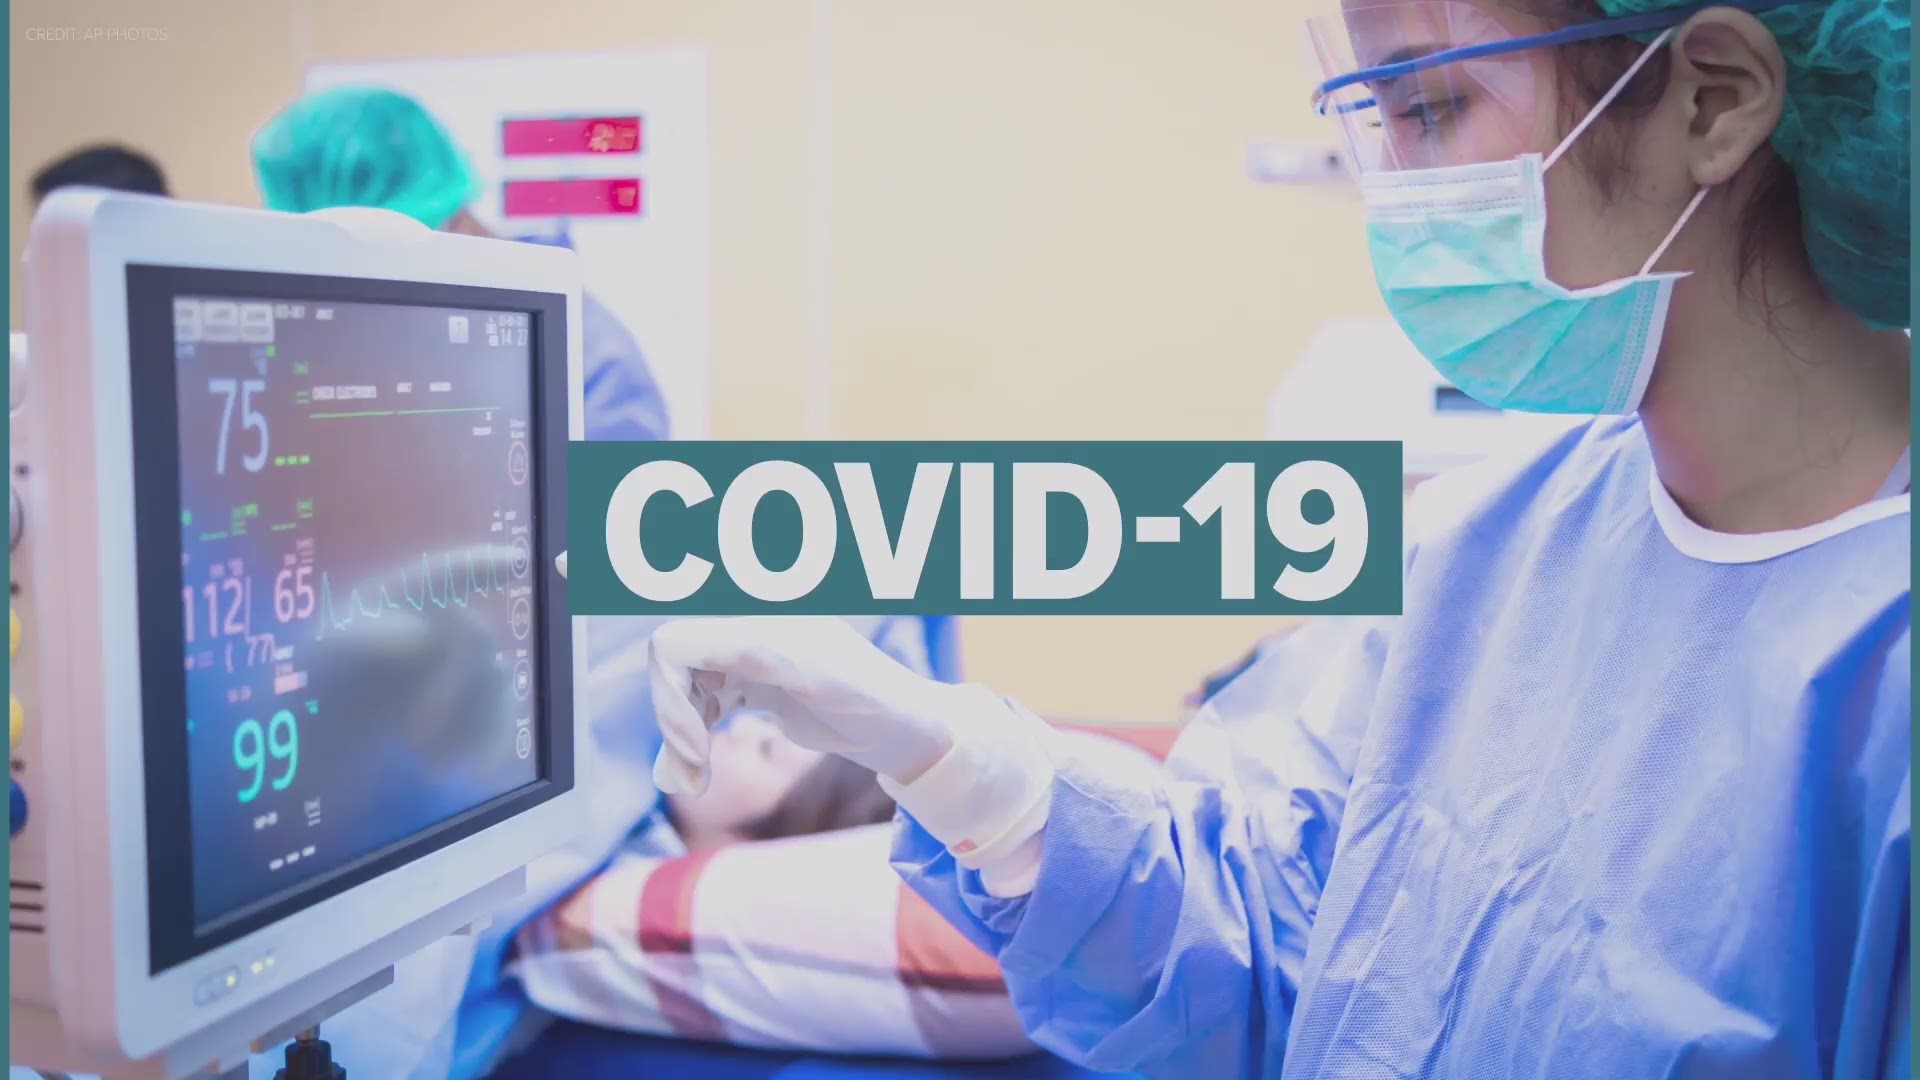 The number of coronavirus cases in Arizona has reached 11,736 as of Tuesday, with 562 coronavirus-related deaths. Here's the latest COVID-19 update.